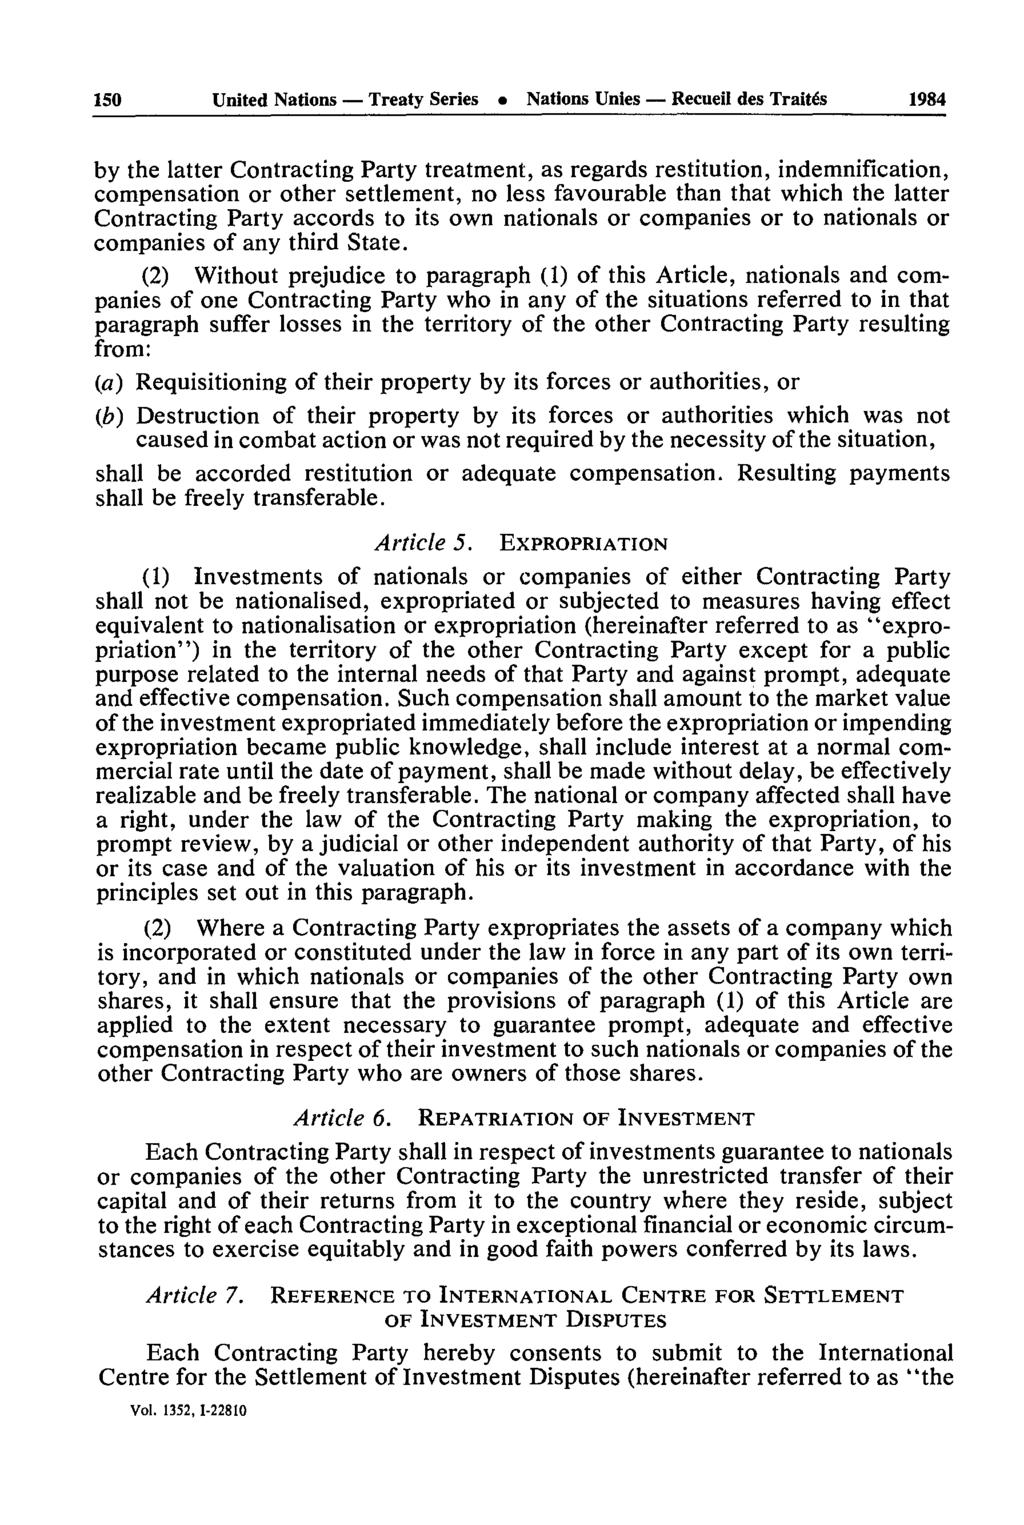 150 United Nations Treaty Series Nations Unies Recueil des Traités 1984 by the latter Contracting Party treatment, as regards restitution, indemnification, compensation or other settlement, no less